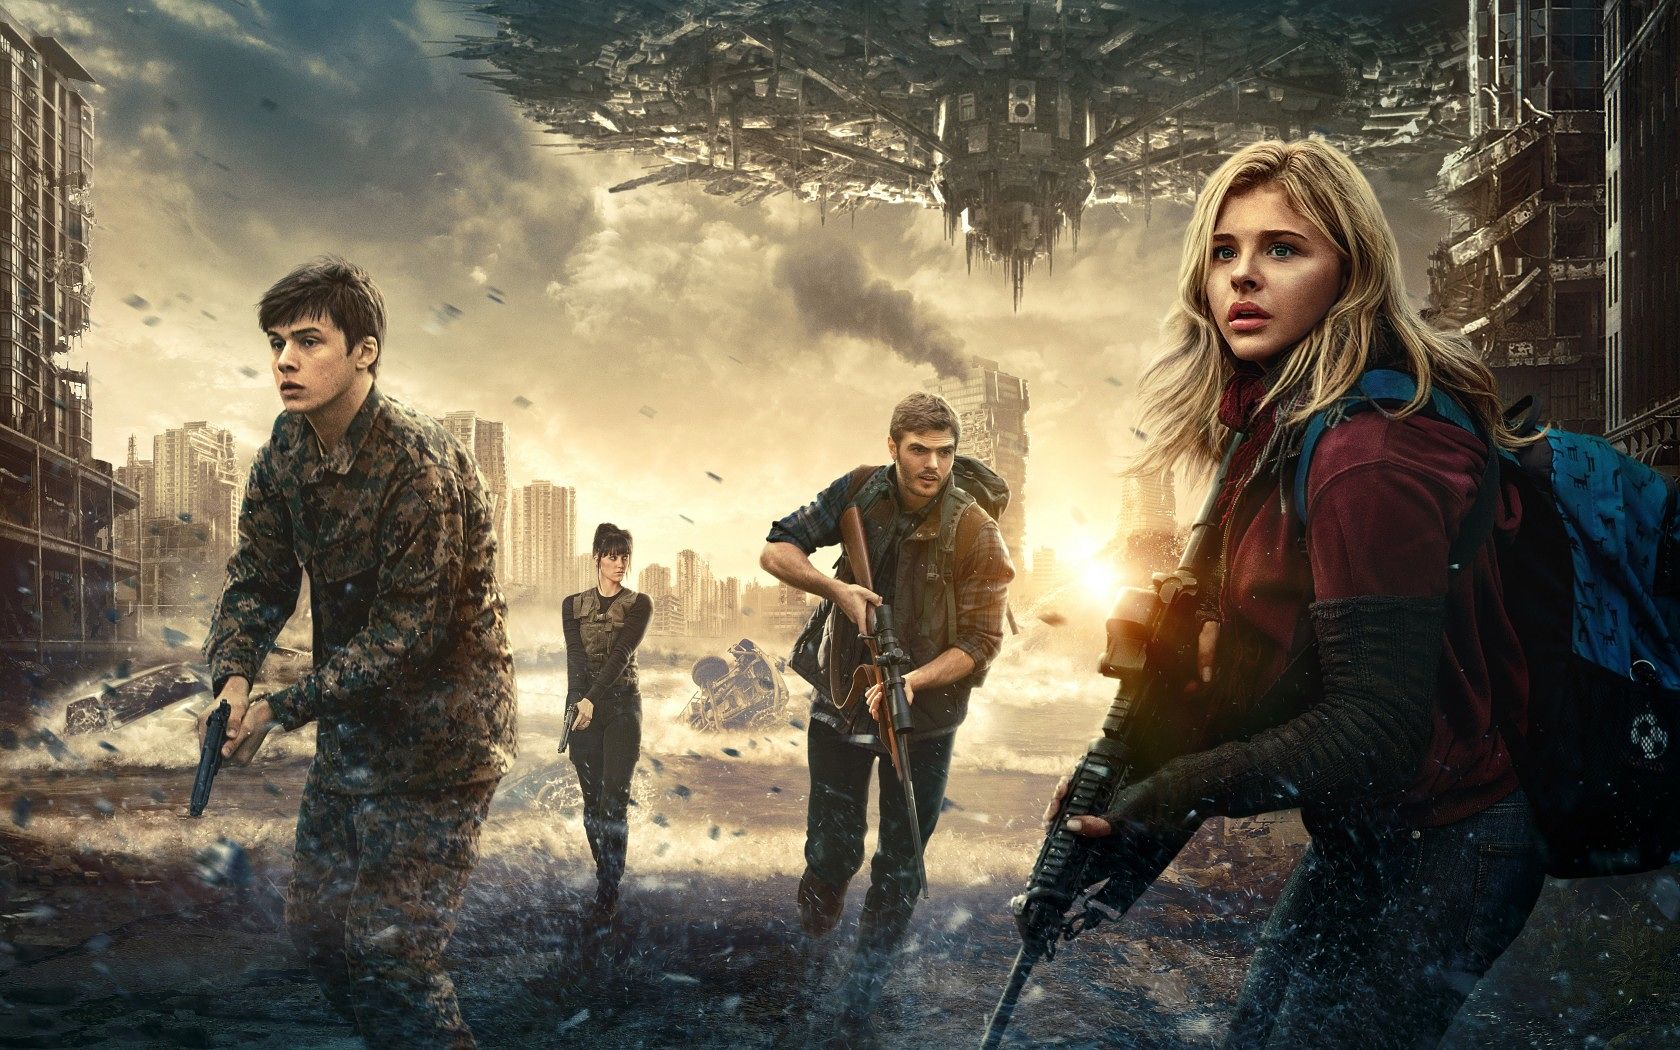 Amazing The 5th Wave Pictures & Backgrounds